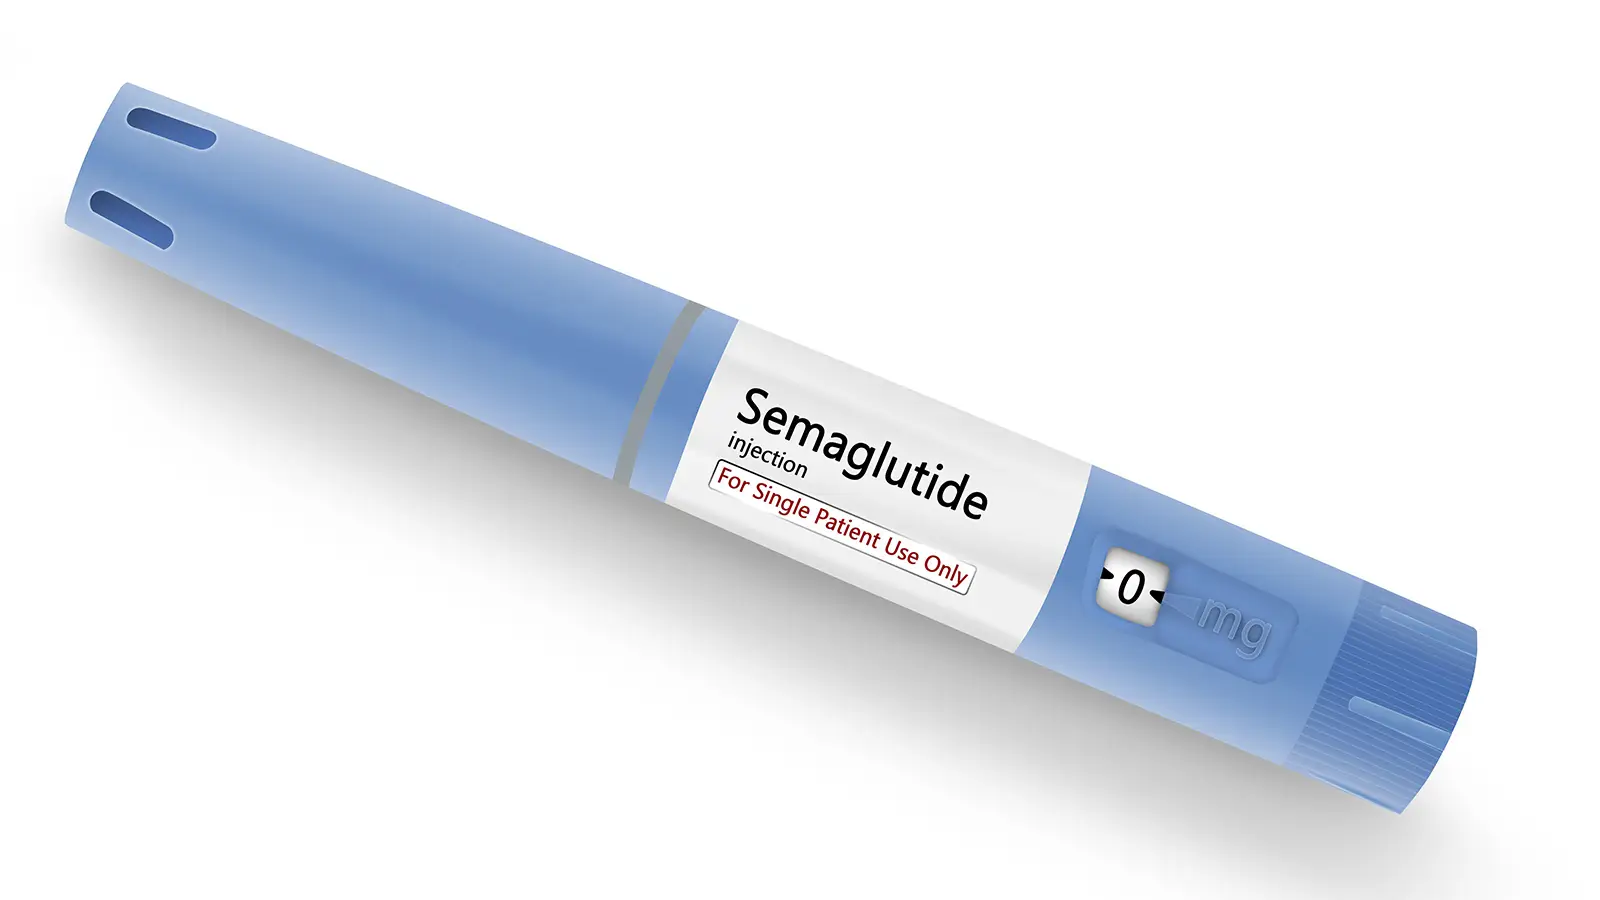 Compounded Semaglutide